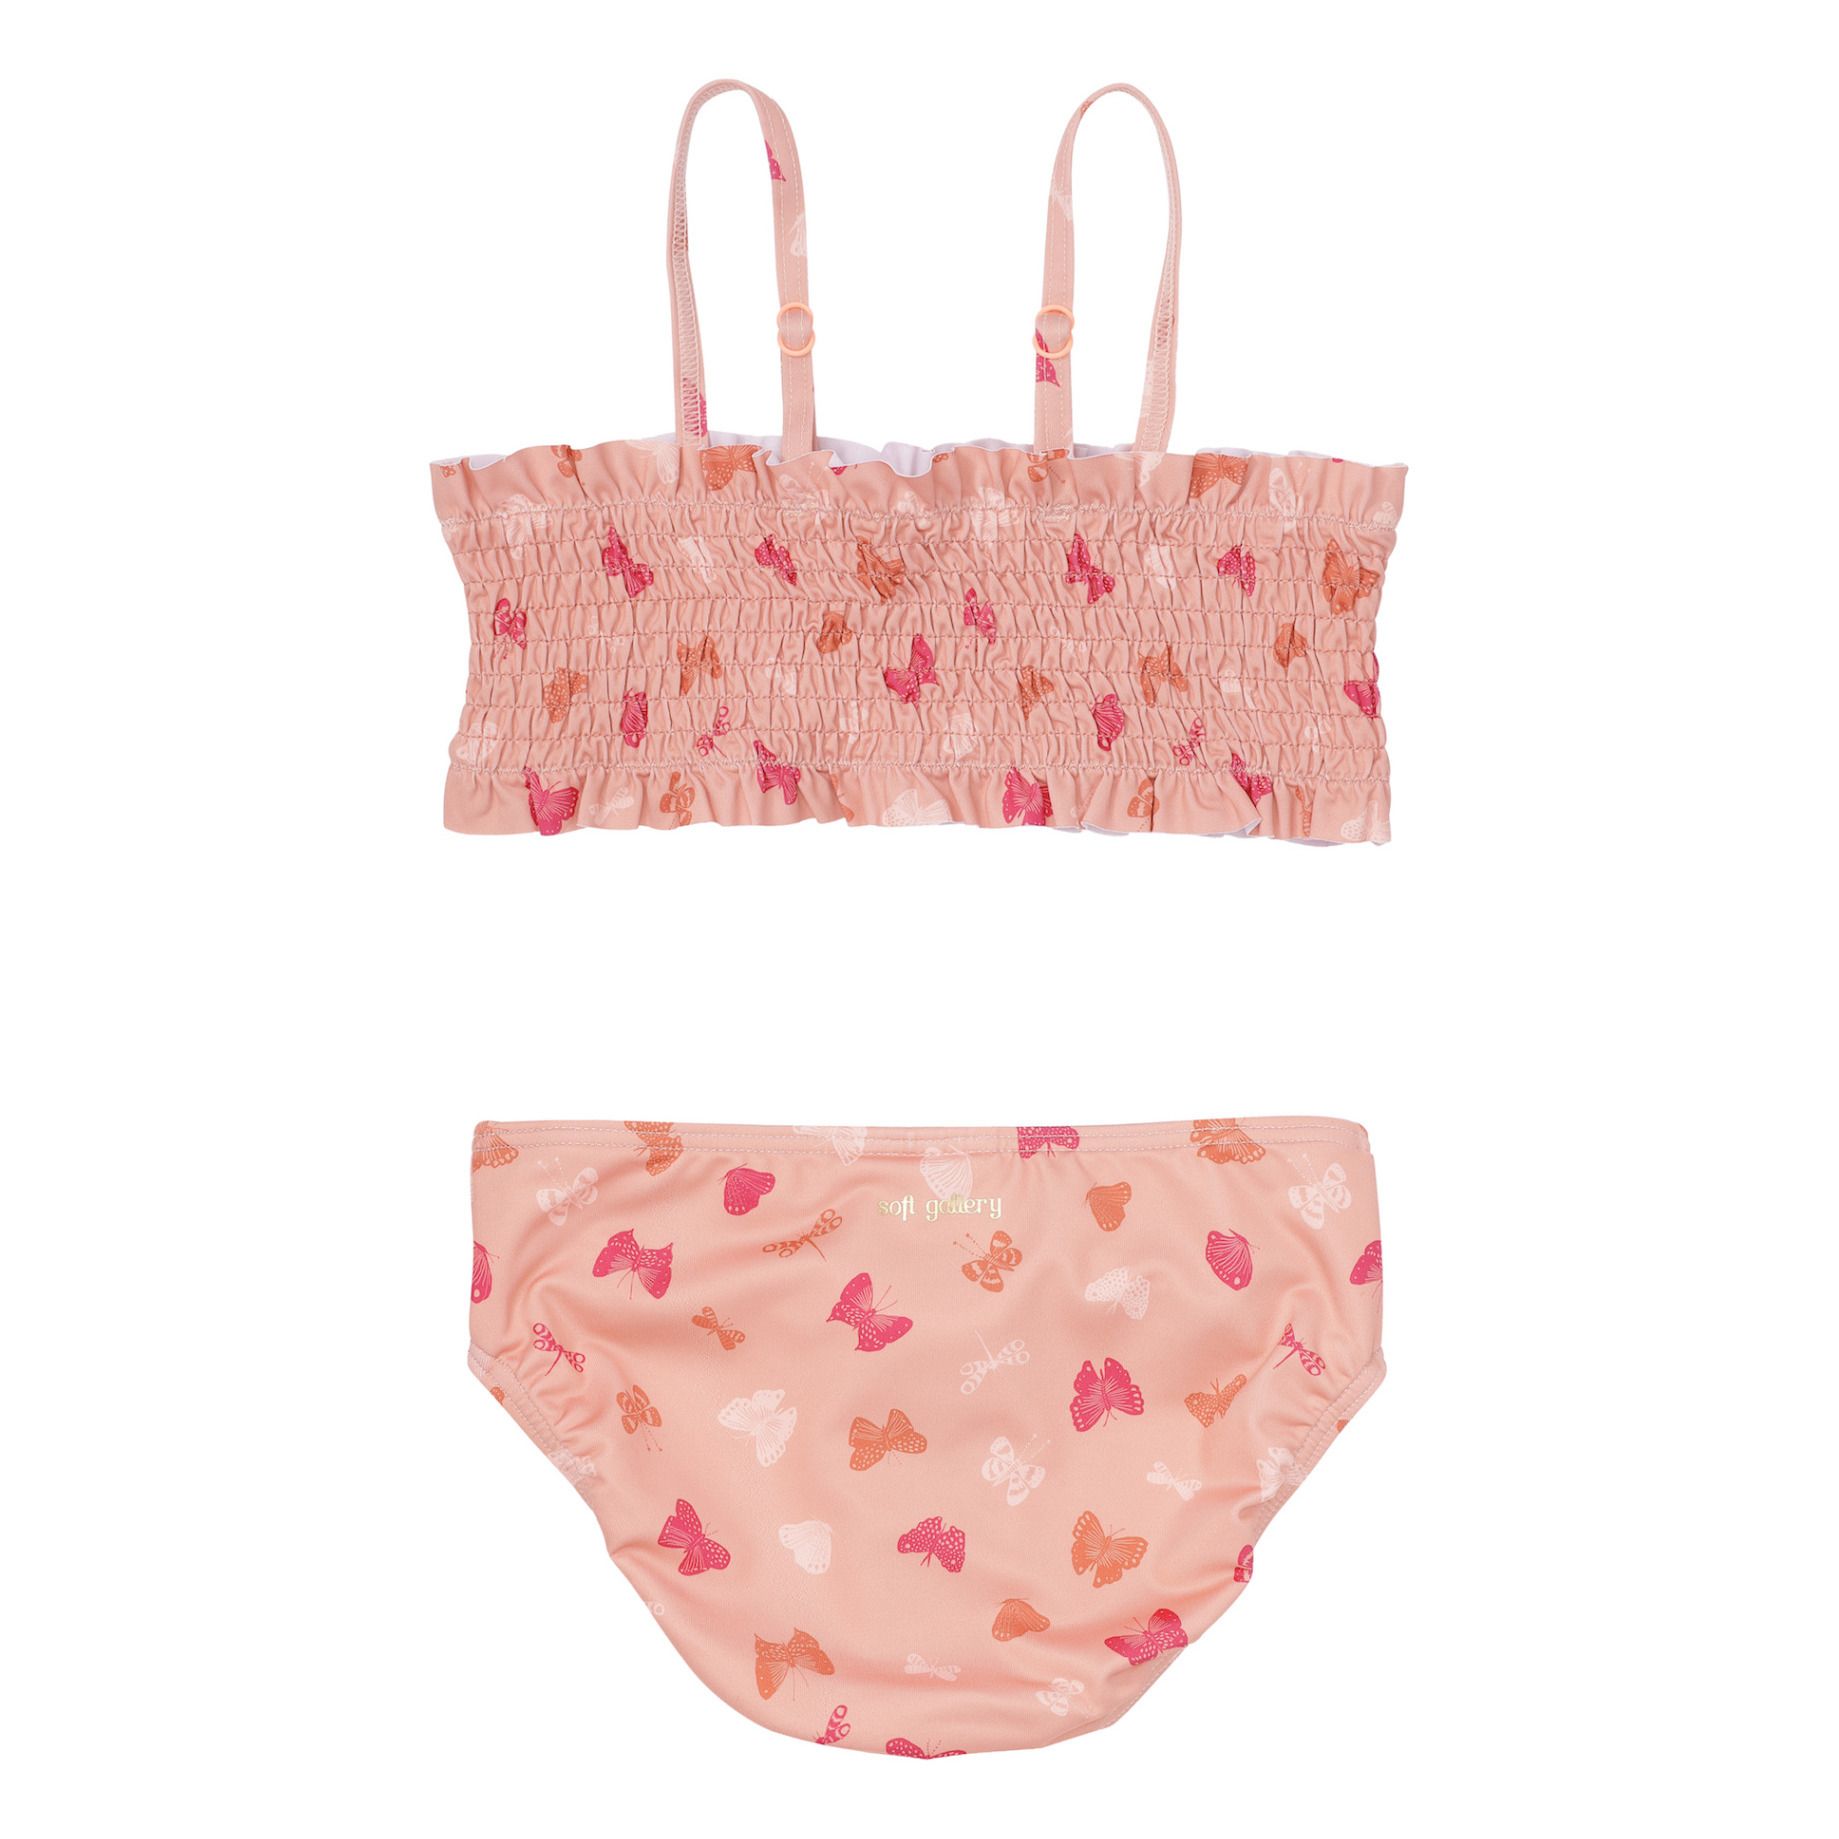 Soft Gallery - Maillot de Bain Galena Papillons Anti-UV - Fille - Rose pêche